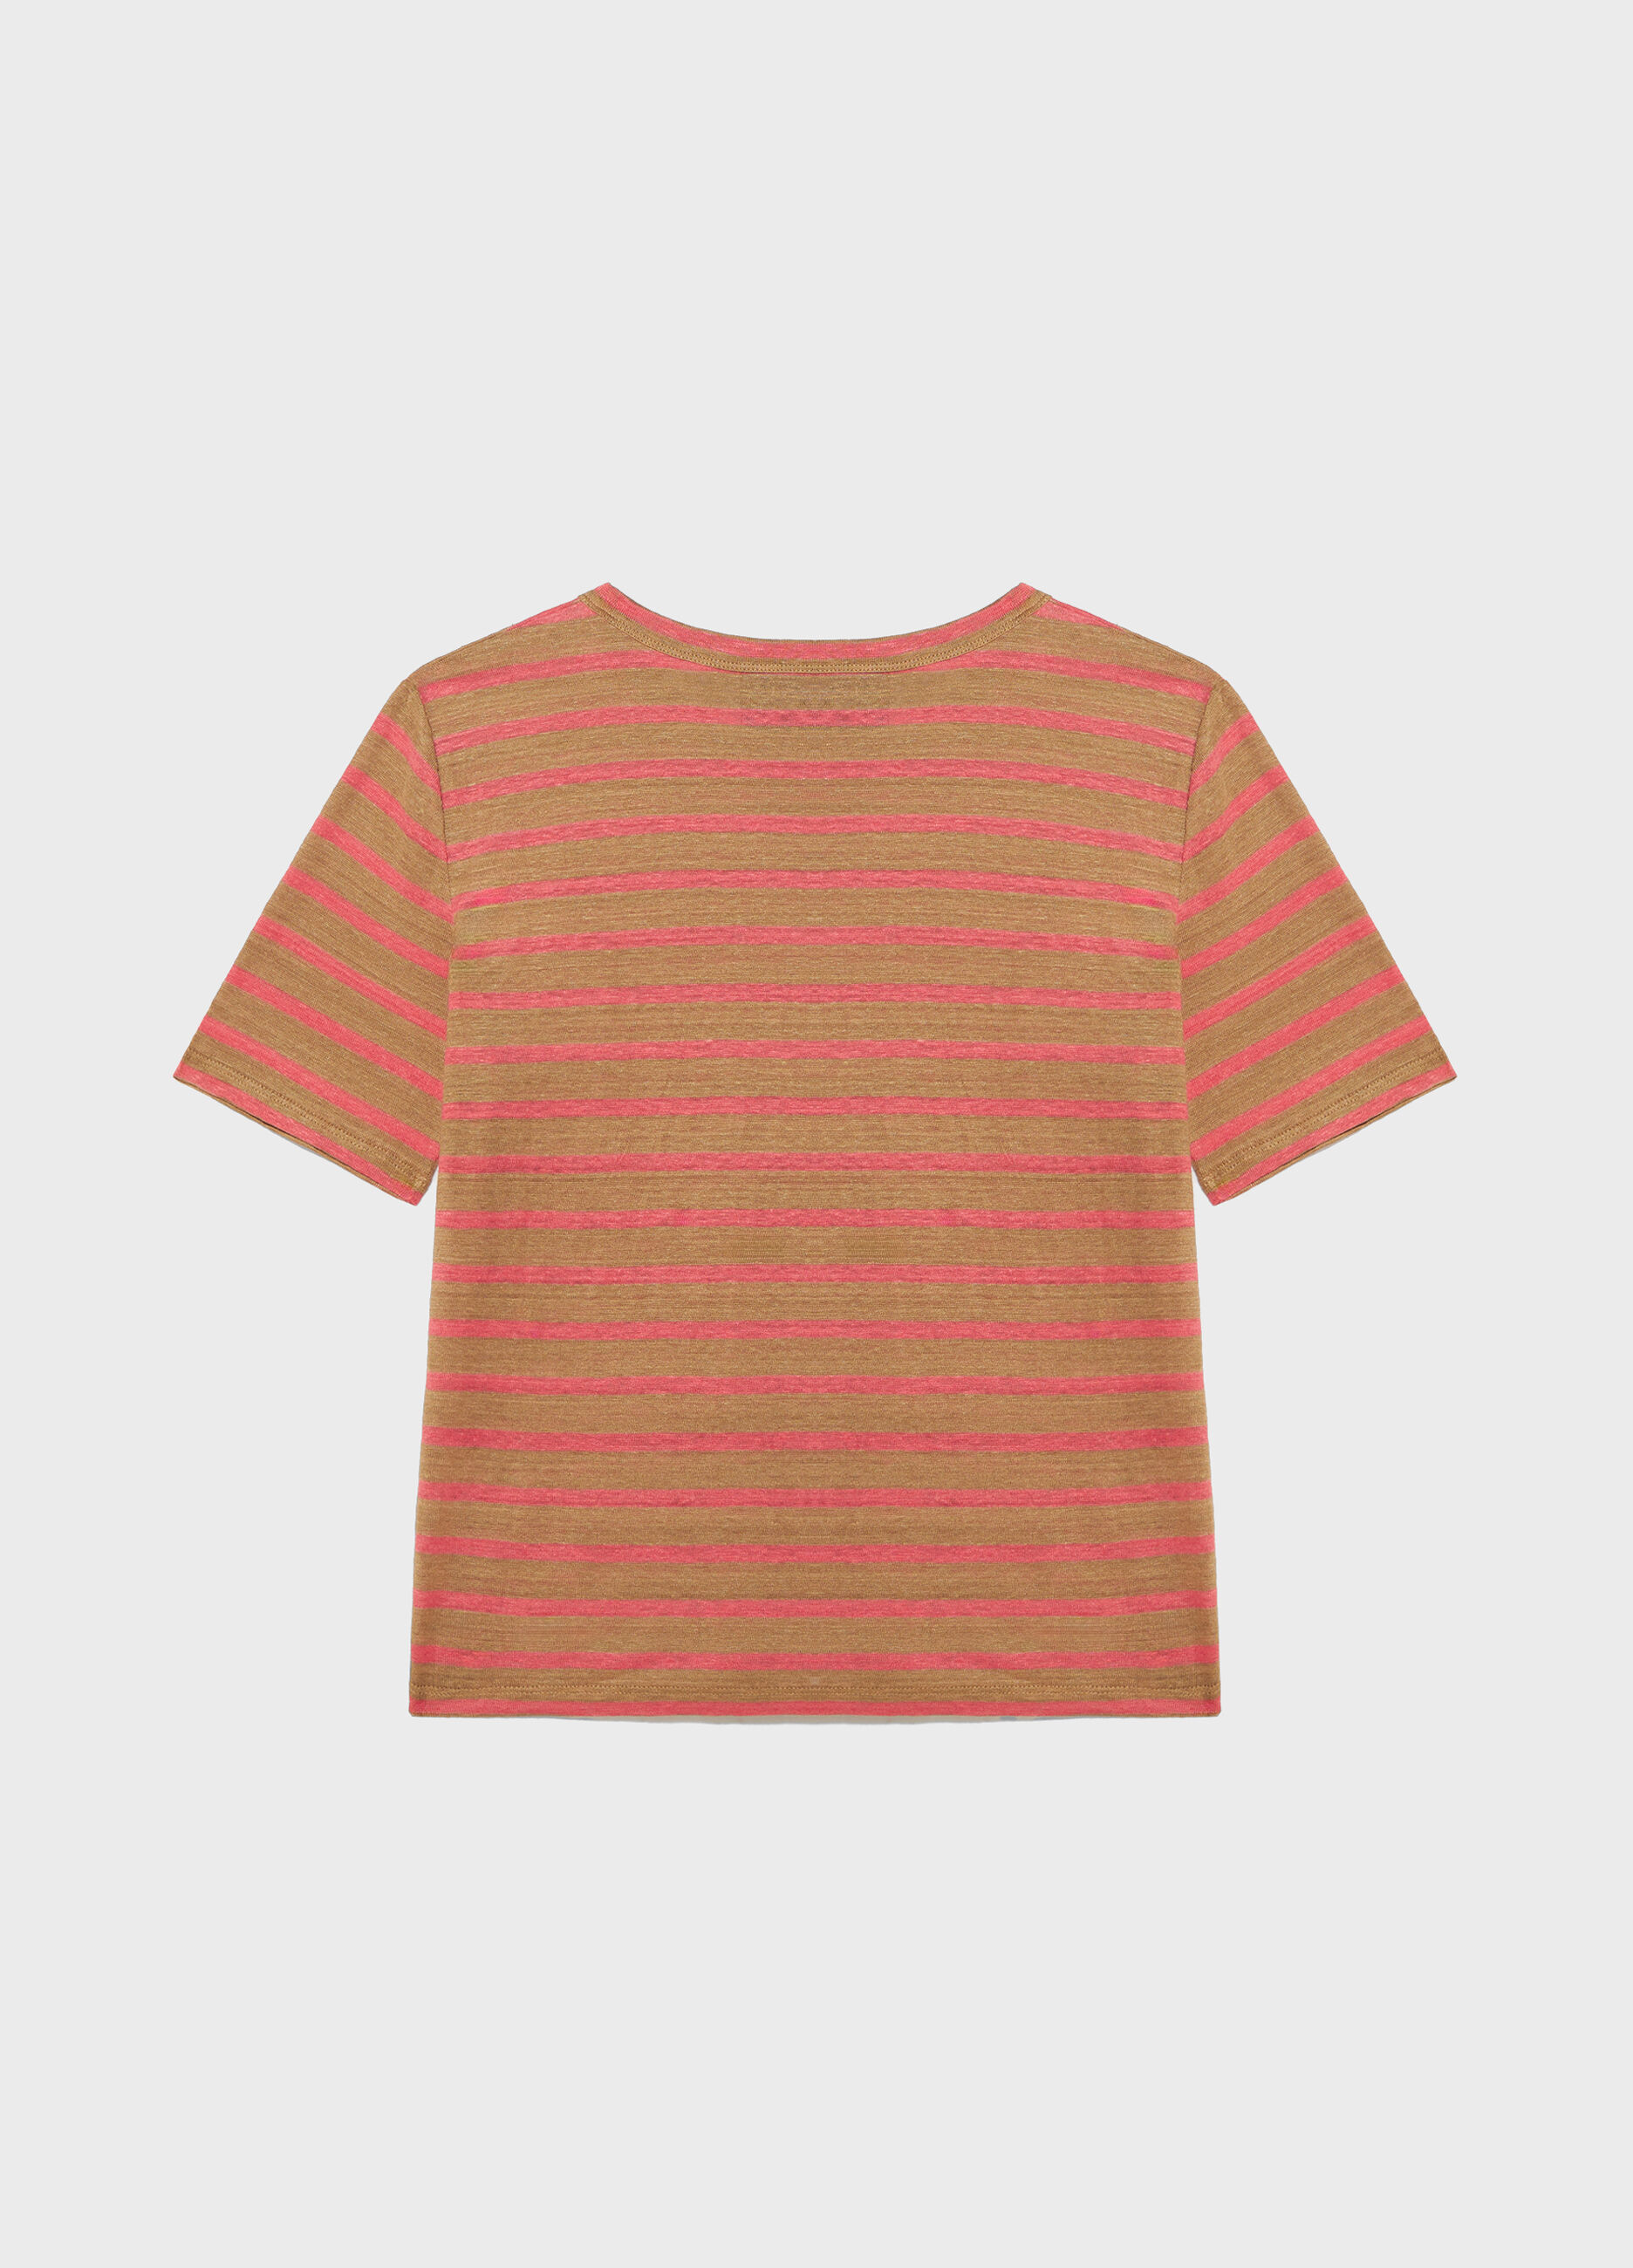 Pink and brown striped linen T-shirt